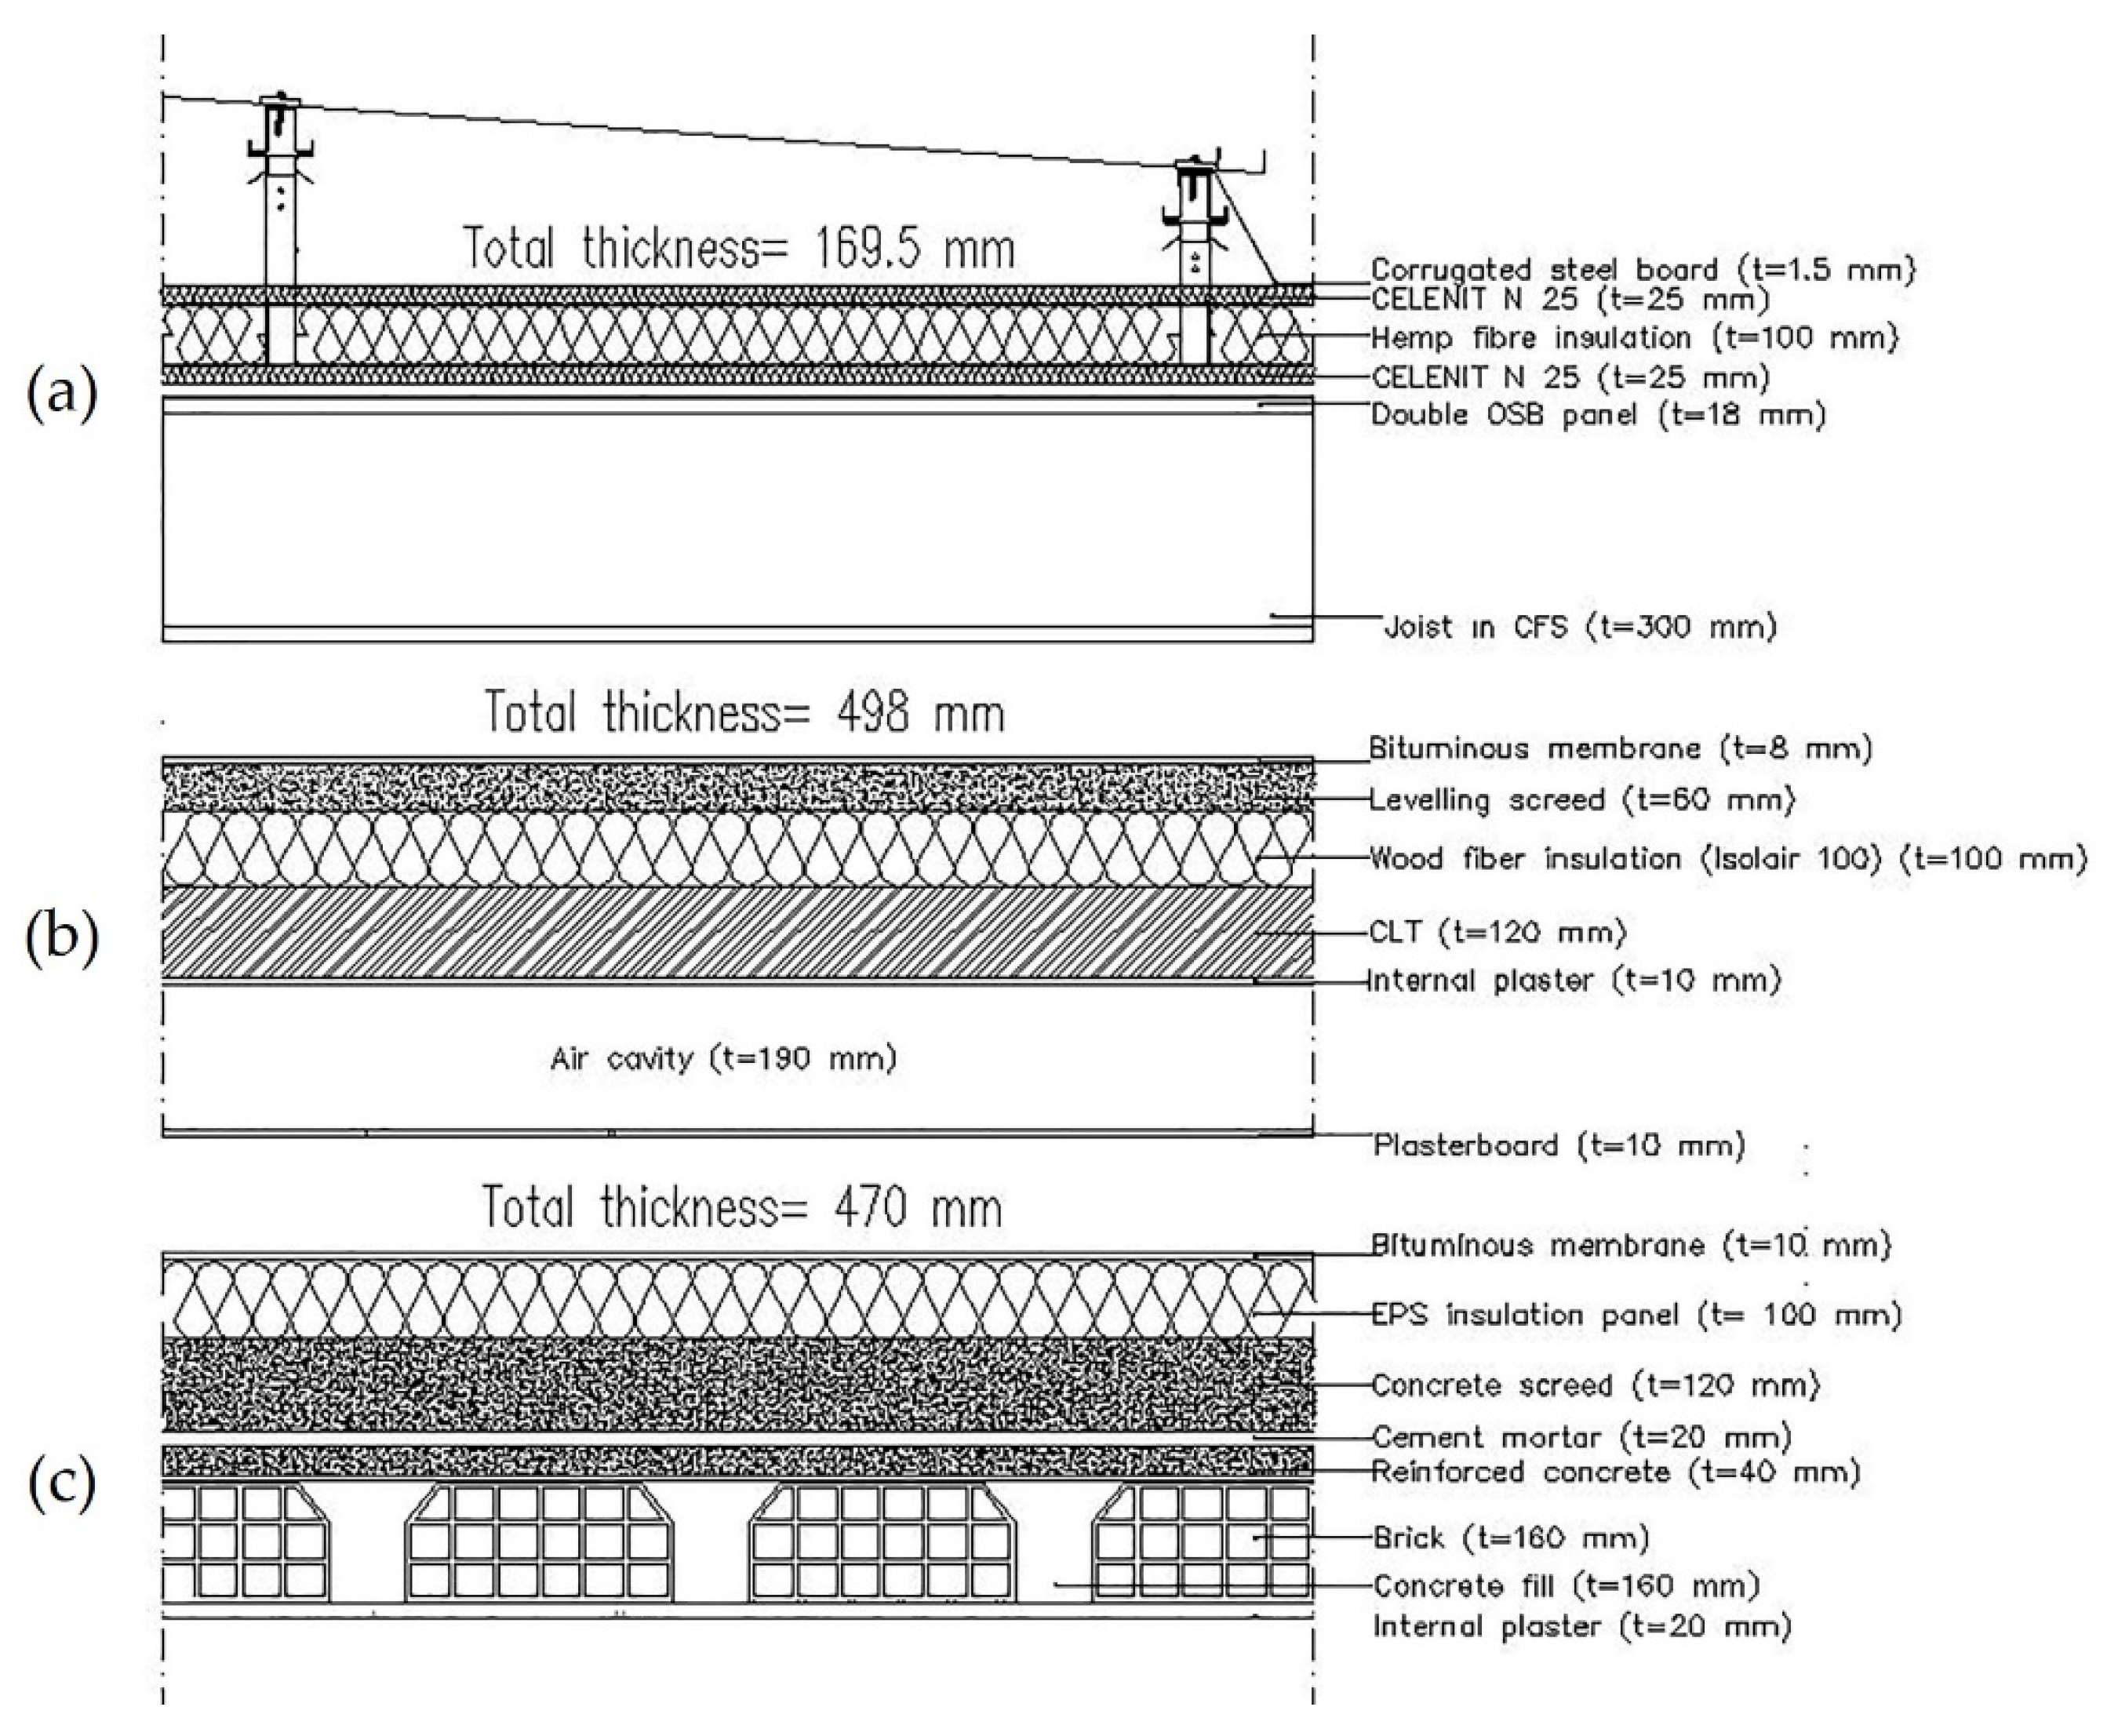 Energies | Free Full-Text | Life Cycle Analysis of Innovative Technologies:  Cold Formed Steel System and Cross Laminated Timber